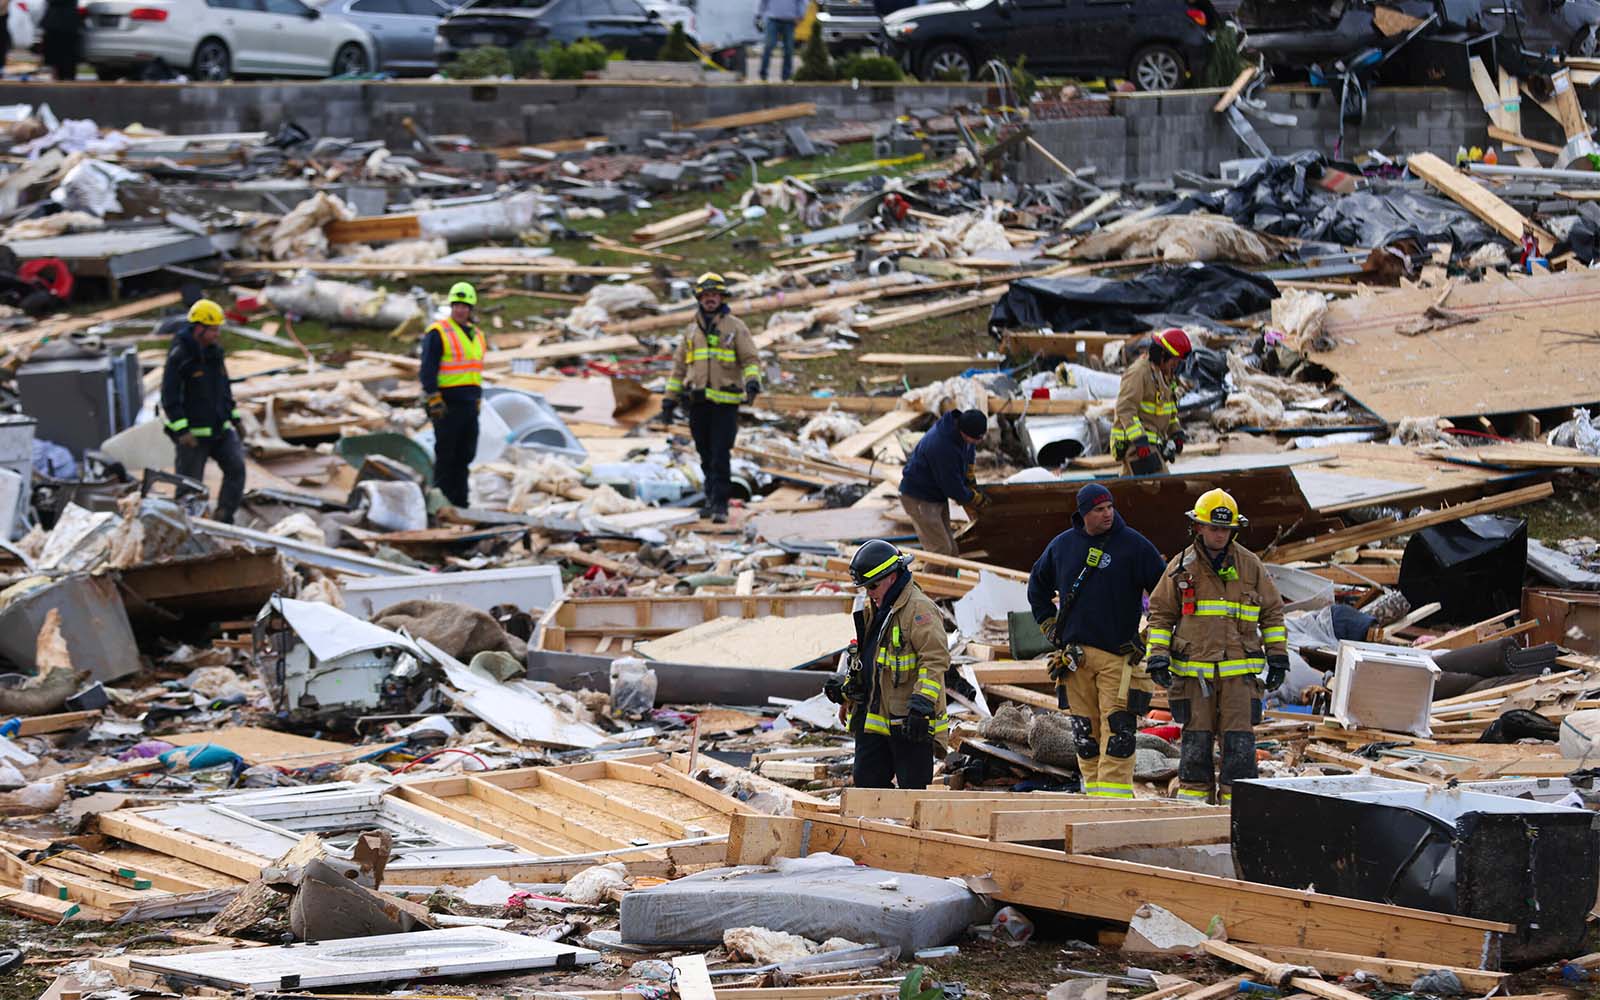 At least 50 feared dead in Kentucky tornadoes as powerful storms rip